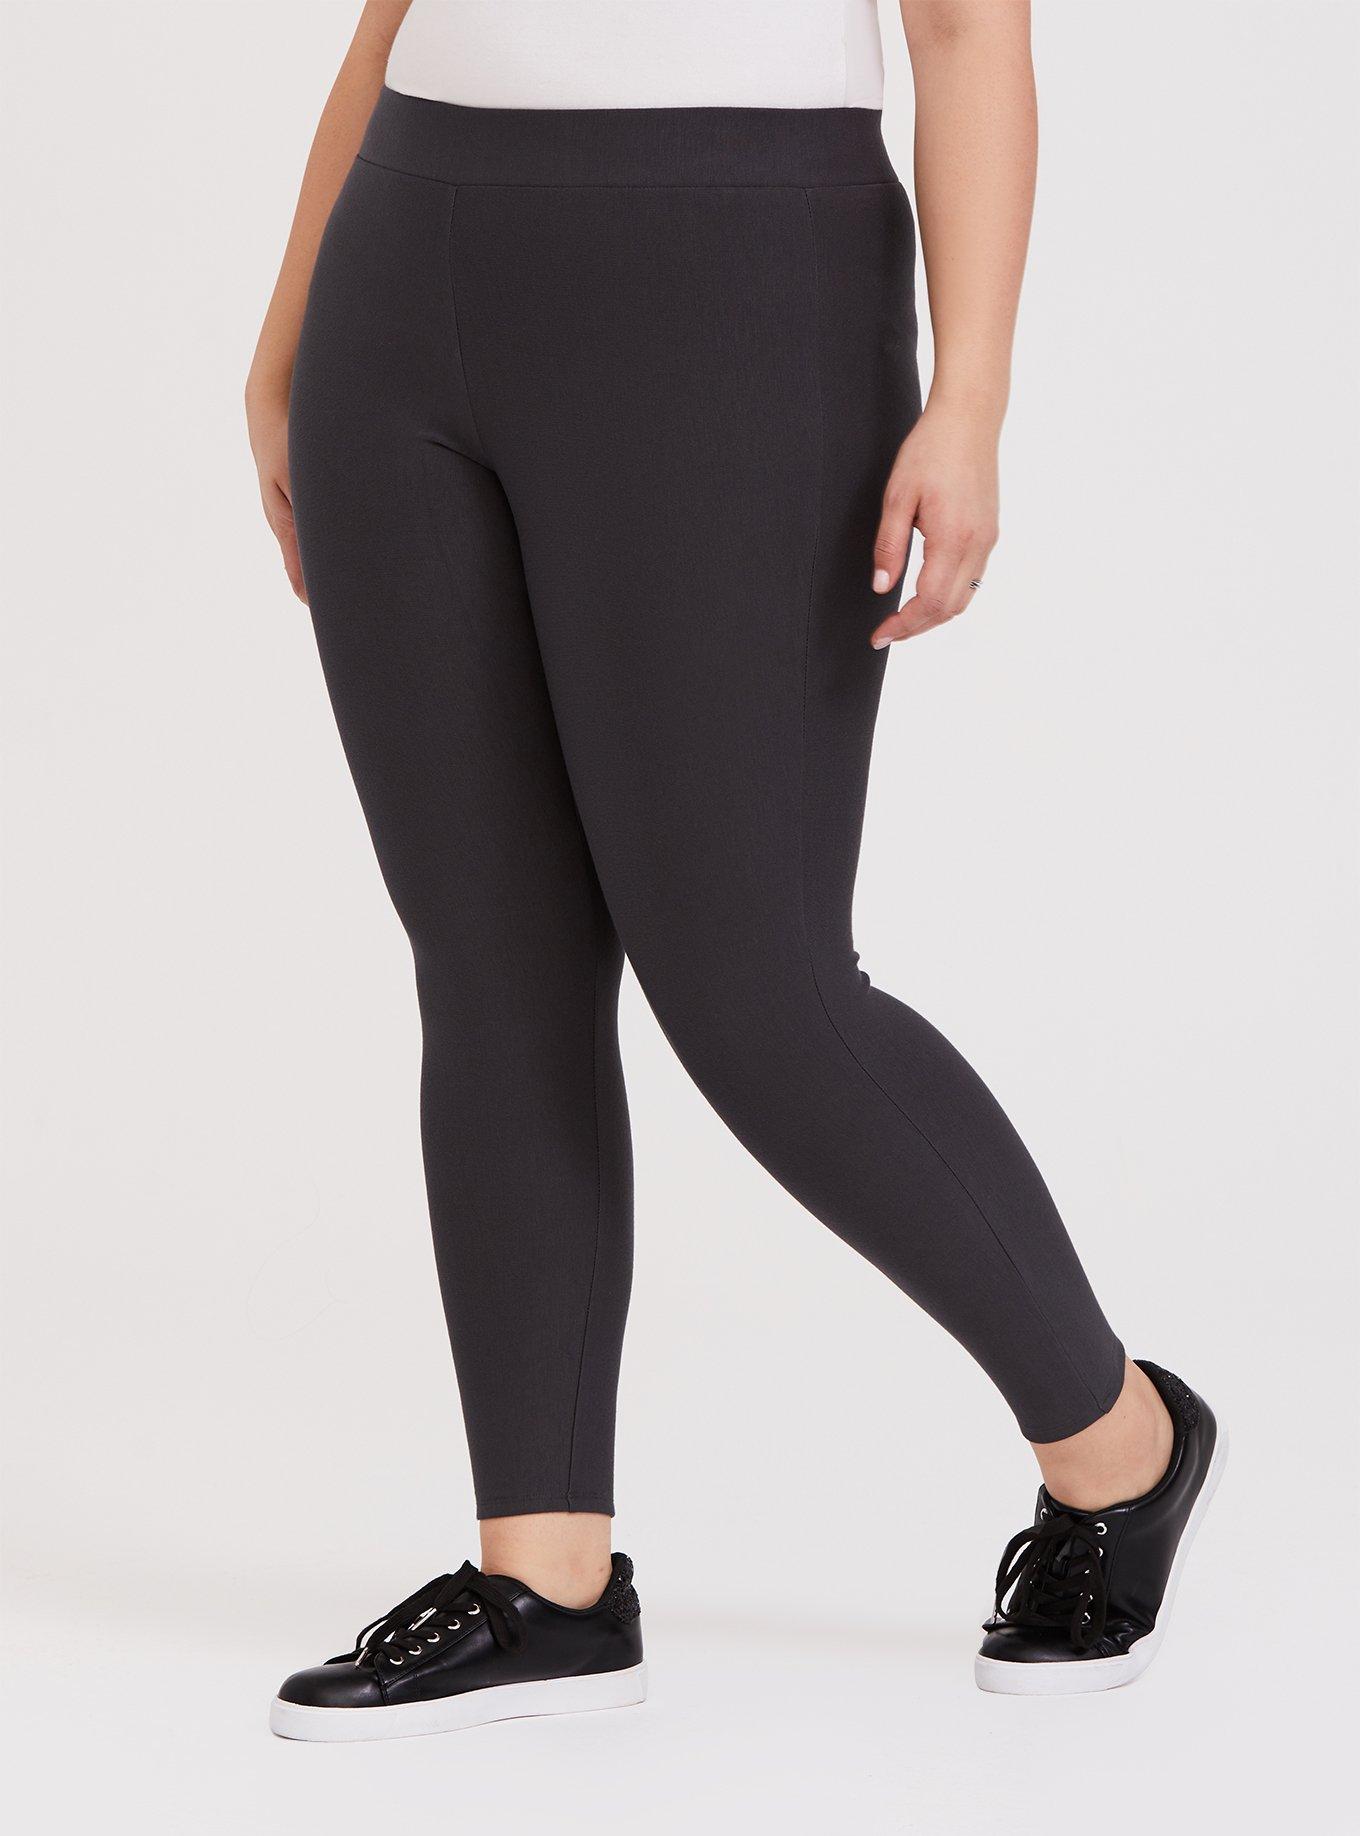 How To Wash Your Leggings Properly - and why it matters – Tutti Frutti  Clothing